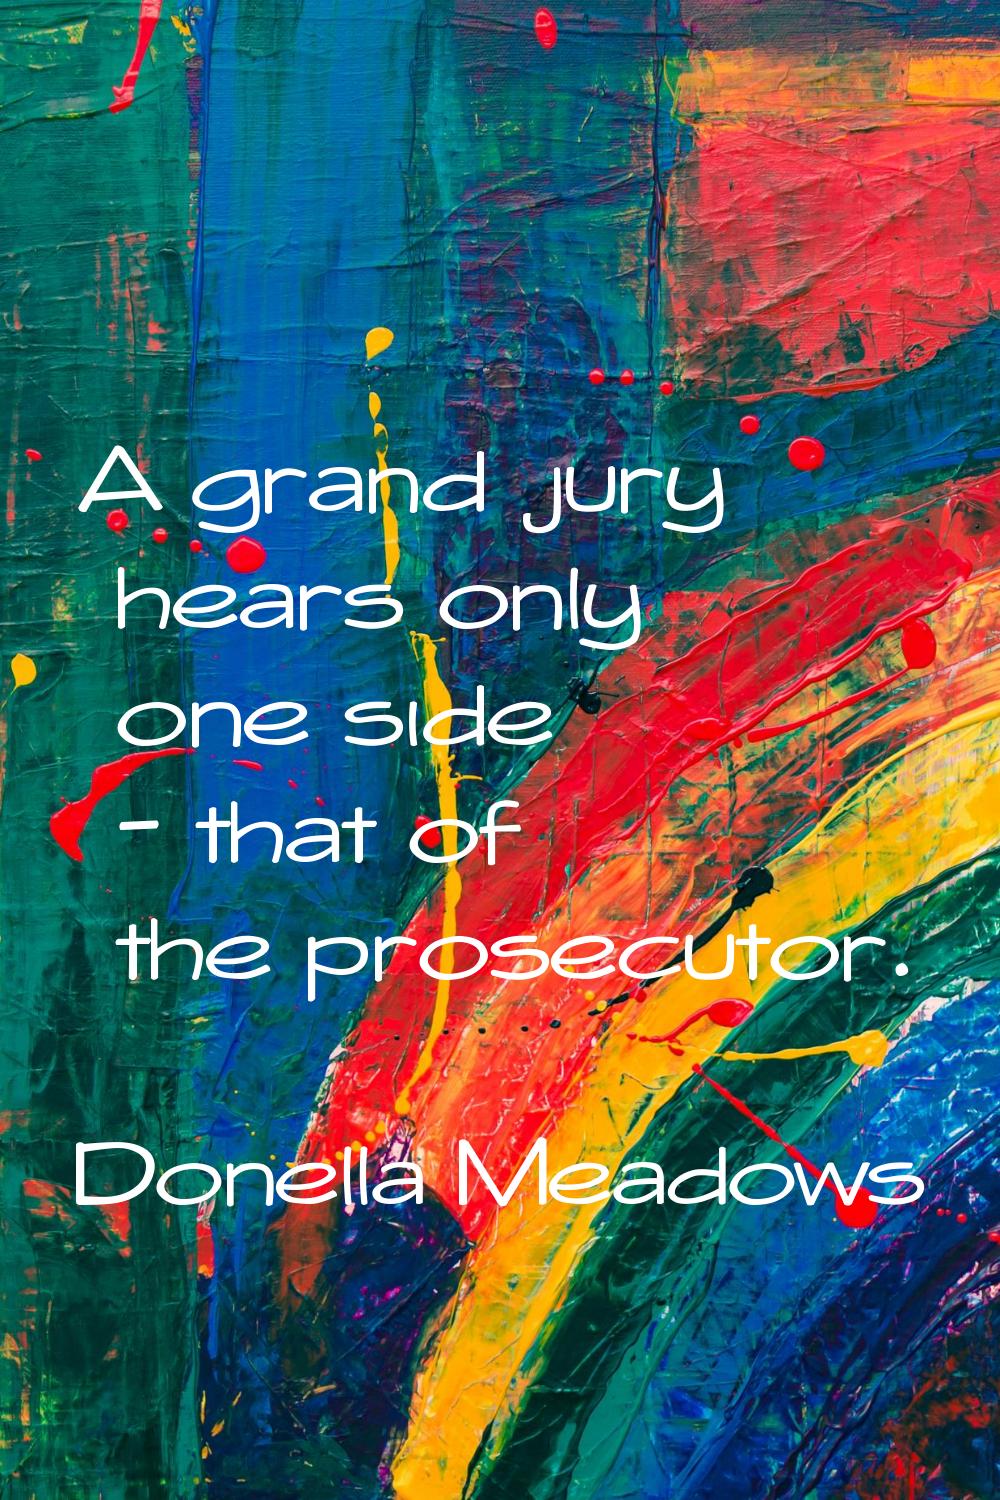 A grand jury hears only one side - that of the prosecutor.